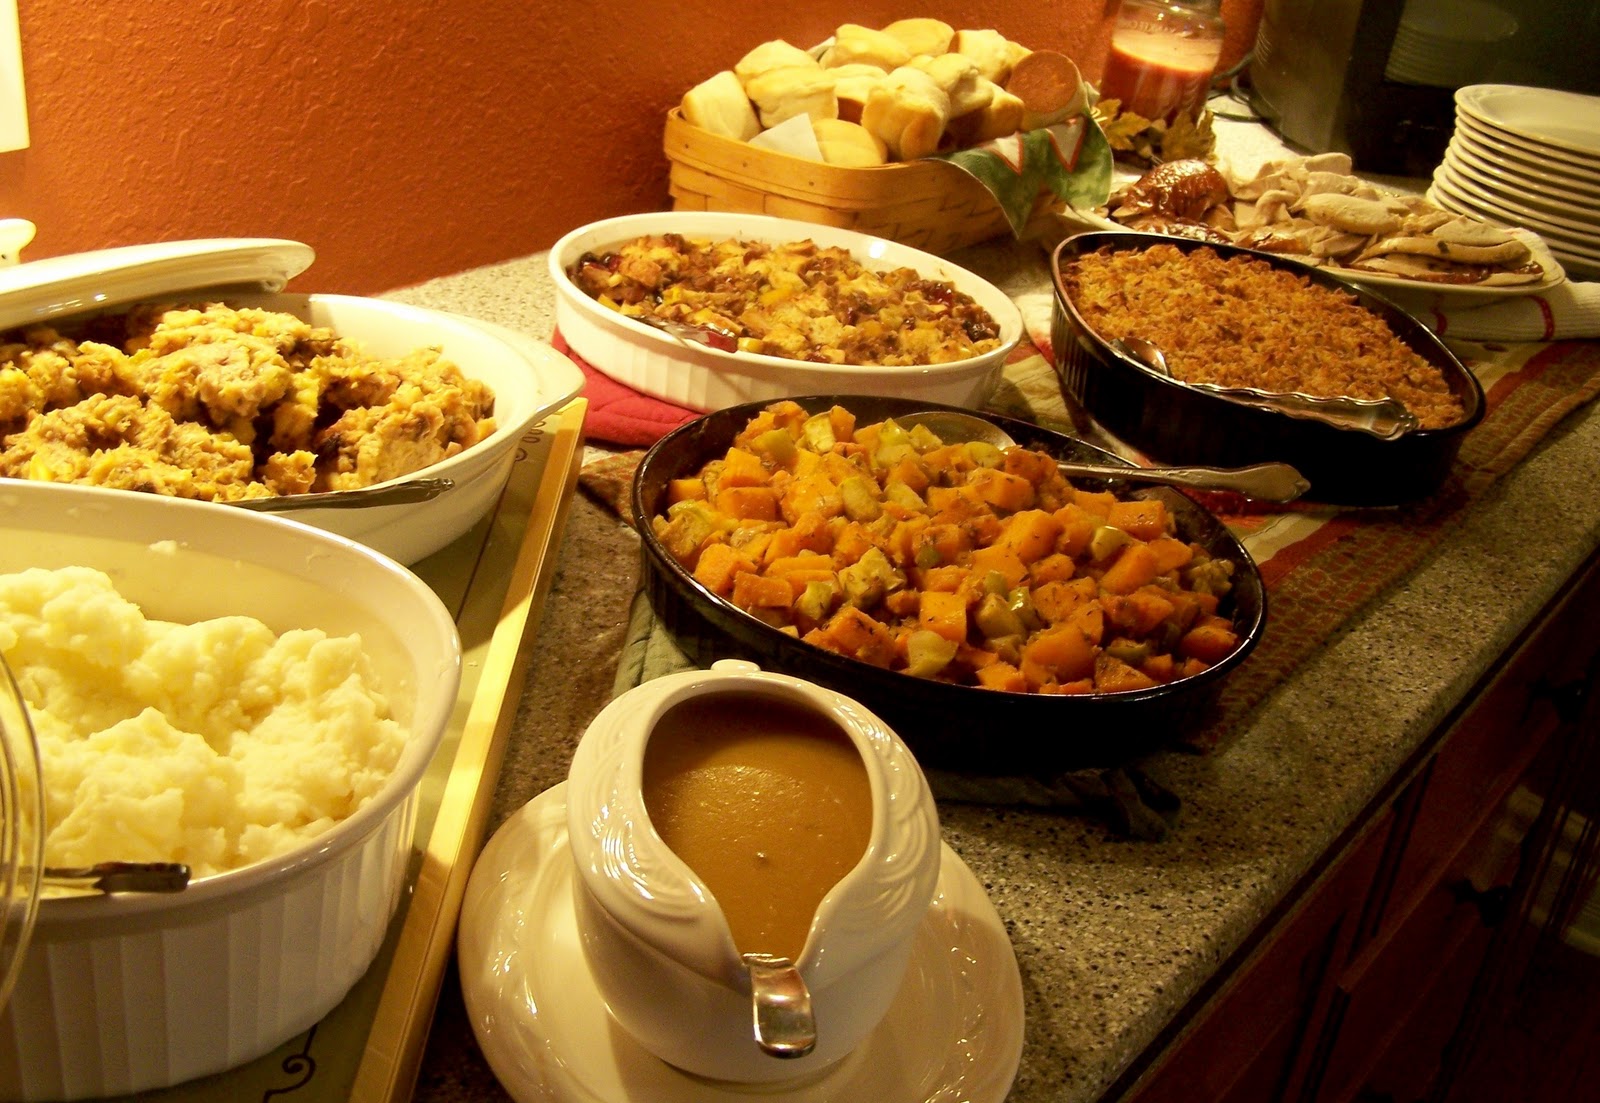 A Thanksgiving Buffet - Serve The Family Meal The Easy Way! | RedGage